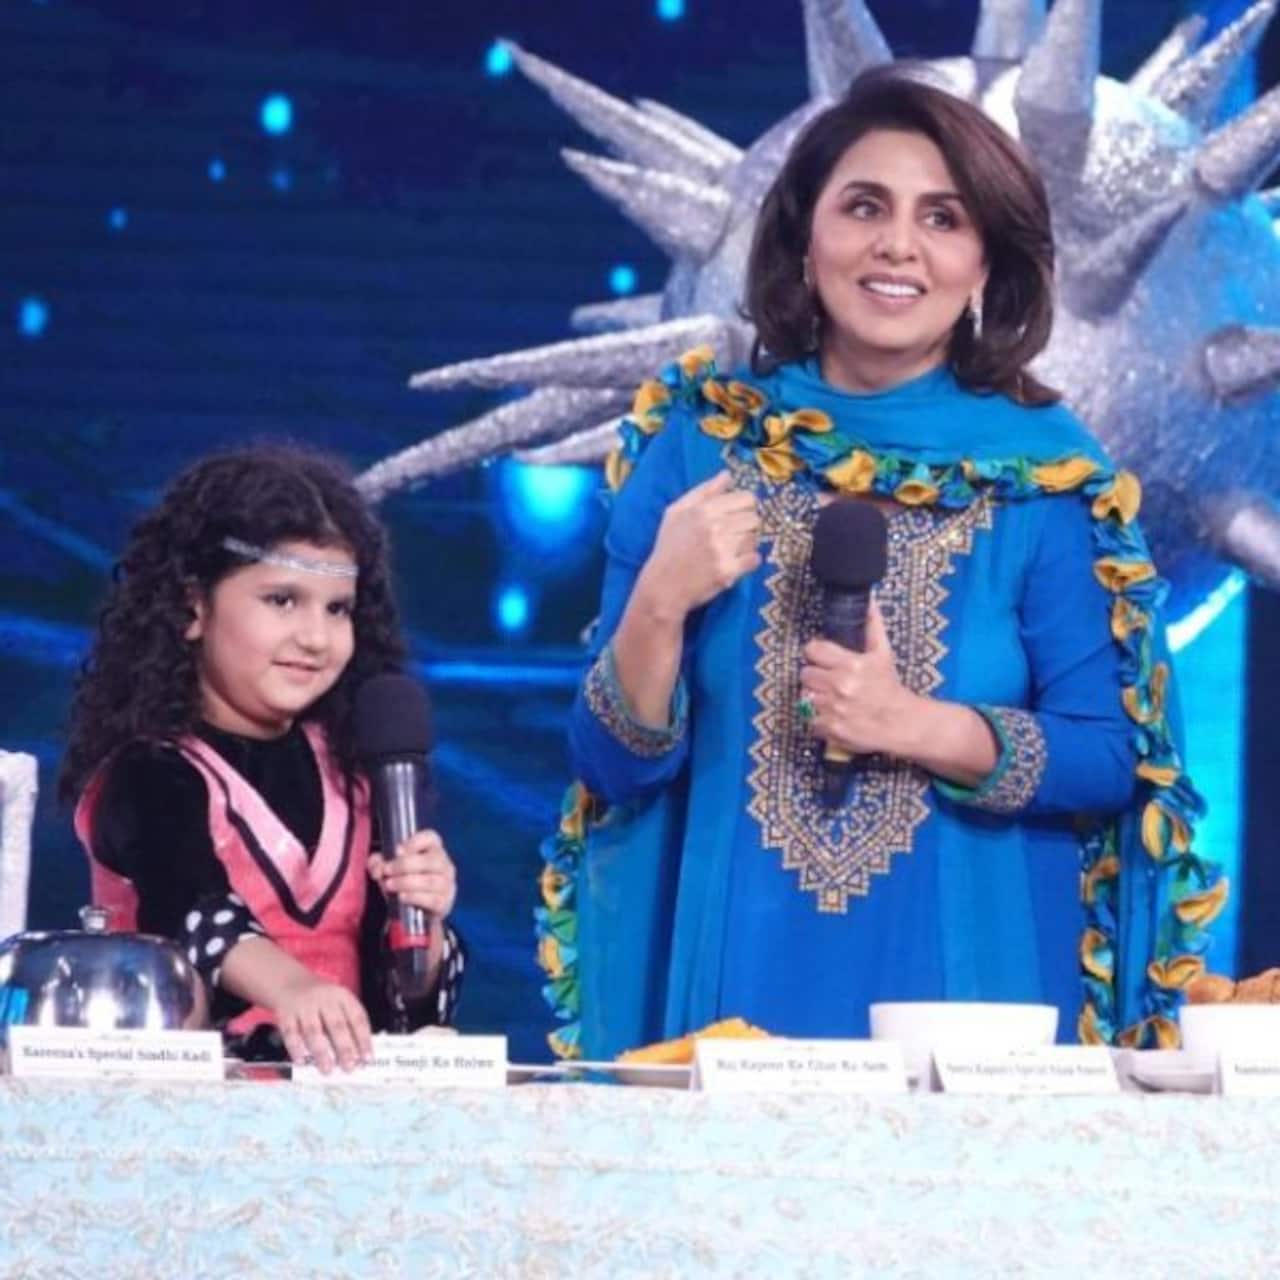 Super Dancer Chapter 4: Neetu Kapoor brings something very special from the Kapoor household for cutie-pie contestant Eesha Mishra – any guesses what it is?